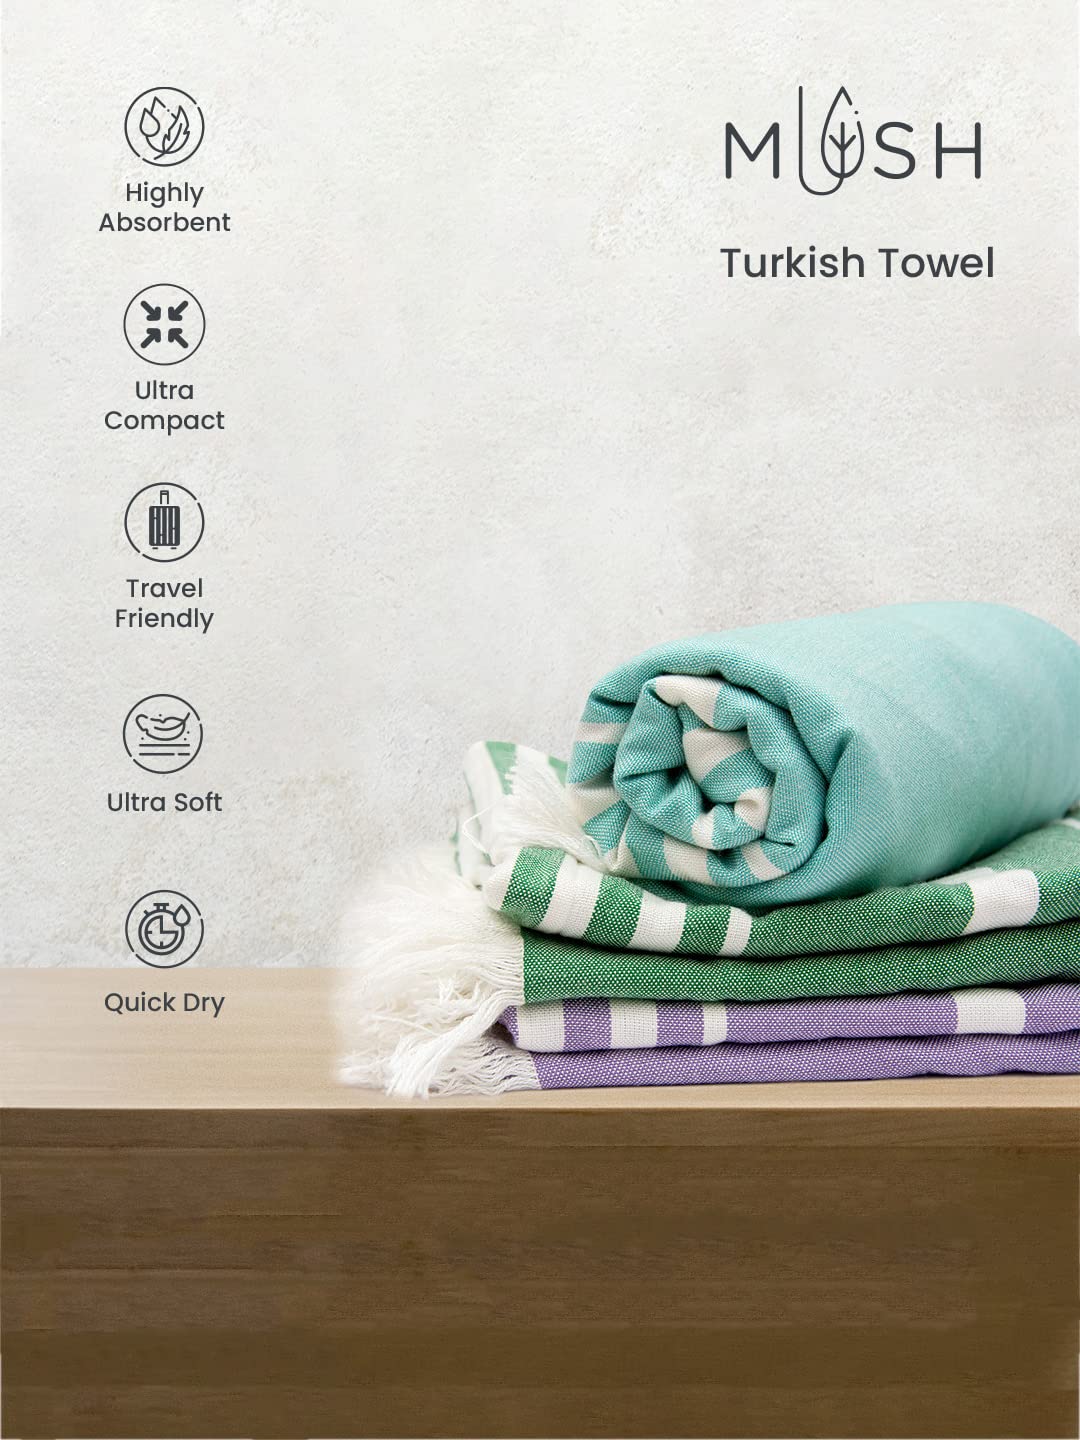 Mush 100% Bamboo Light Weight & Ultra-Compact Turkish Towel Super Soft, Absorbent, Quick Dry,Anti-Odor Bamboo Towel for Bath, Gym, Swim, Workout (2, Lavender - Dark Green)